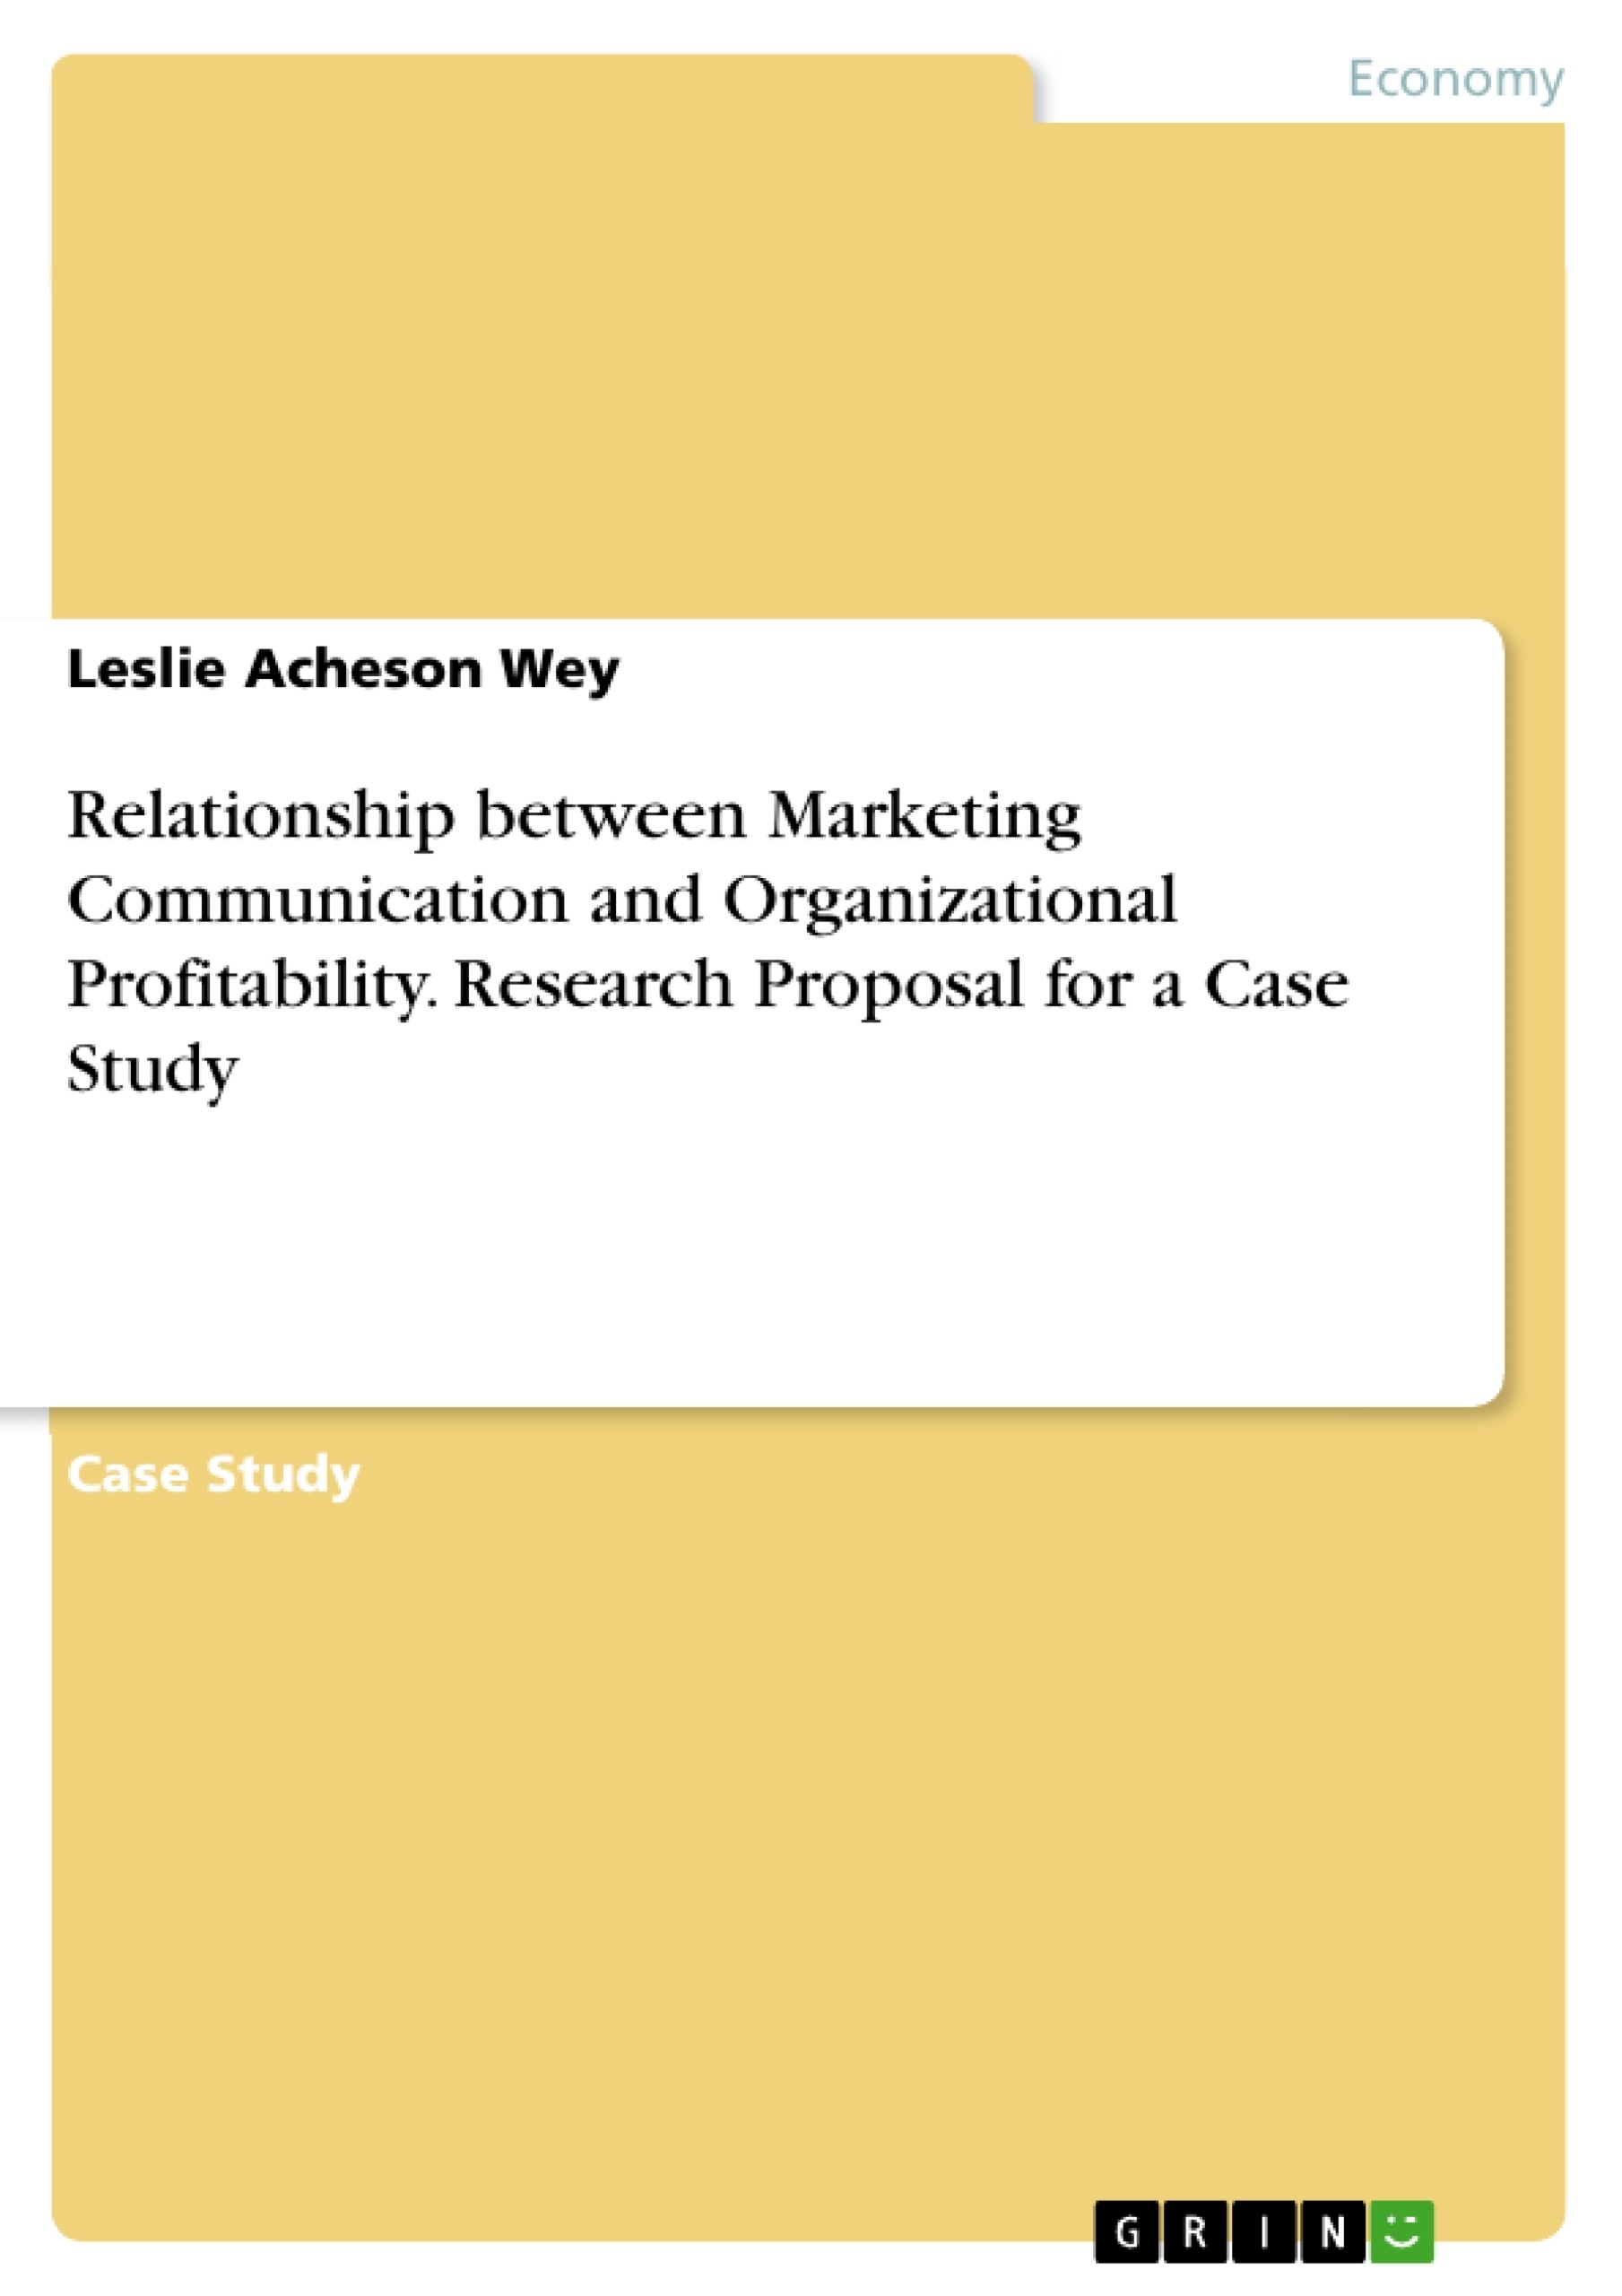 Title: Relationship between Marketing Communication and Organizational Profitability. Research Proposal for a Case Study